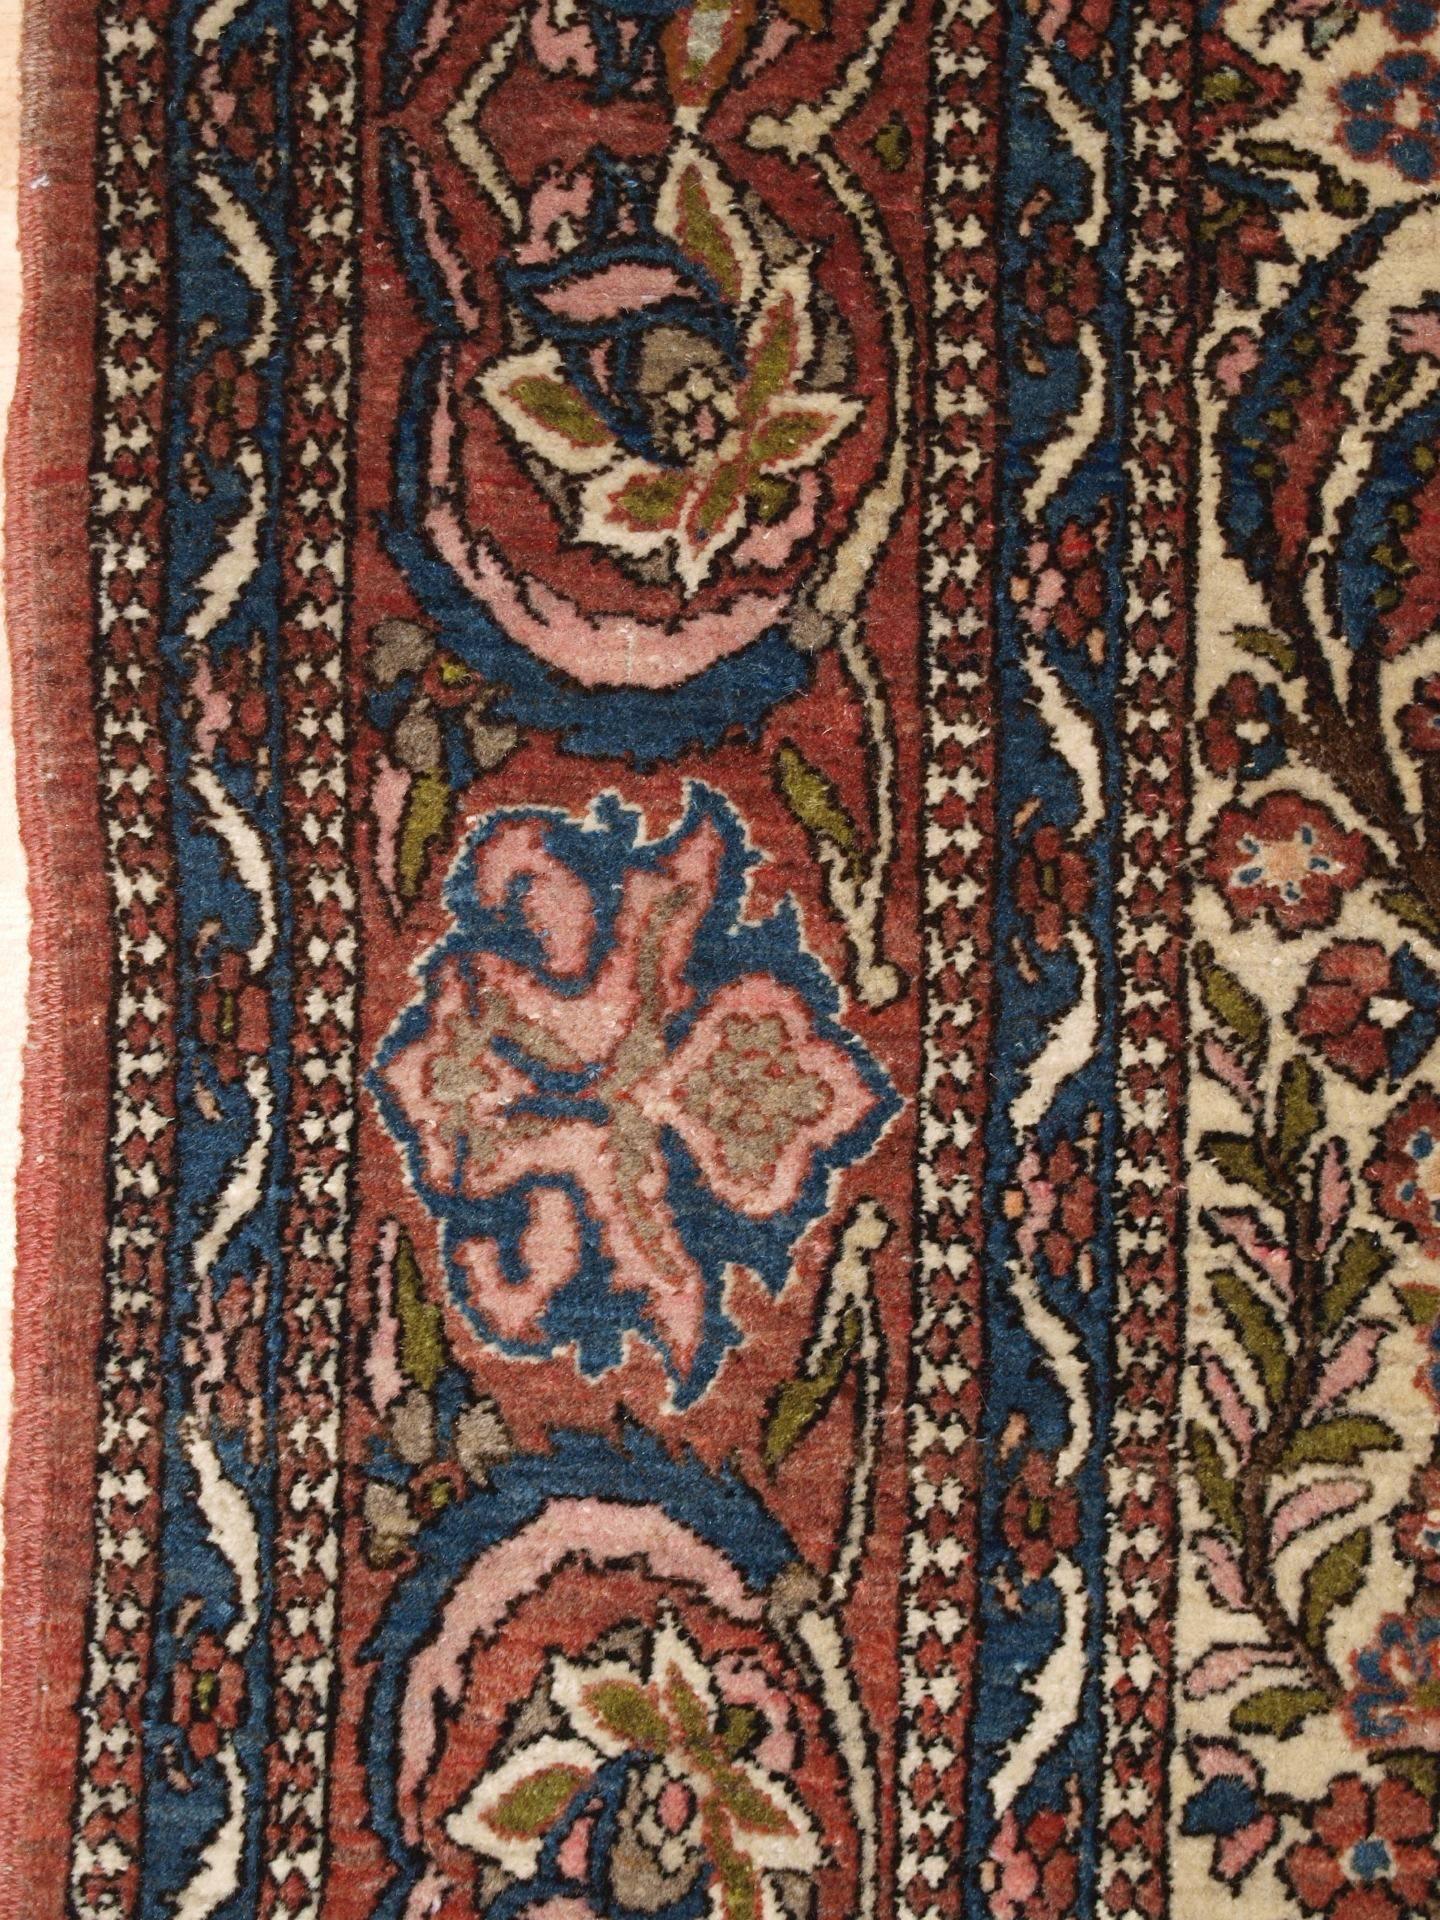 Isfahan Prayer Rug with a Very Traditional Floral Vase Design, circa 1900 In Excellent Condition For Sale In Moreton-in-Marsh, GB